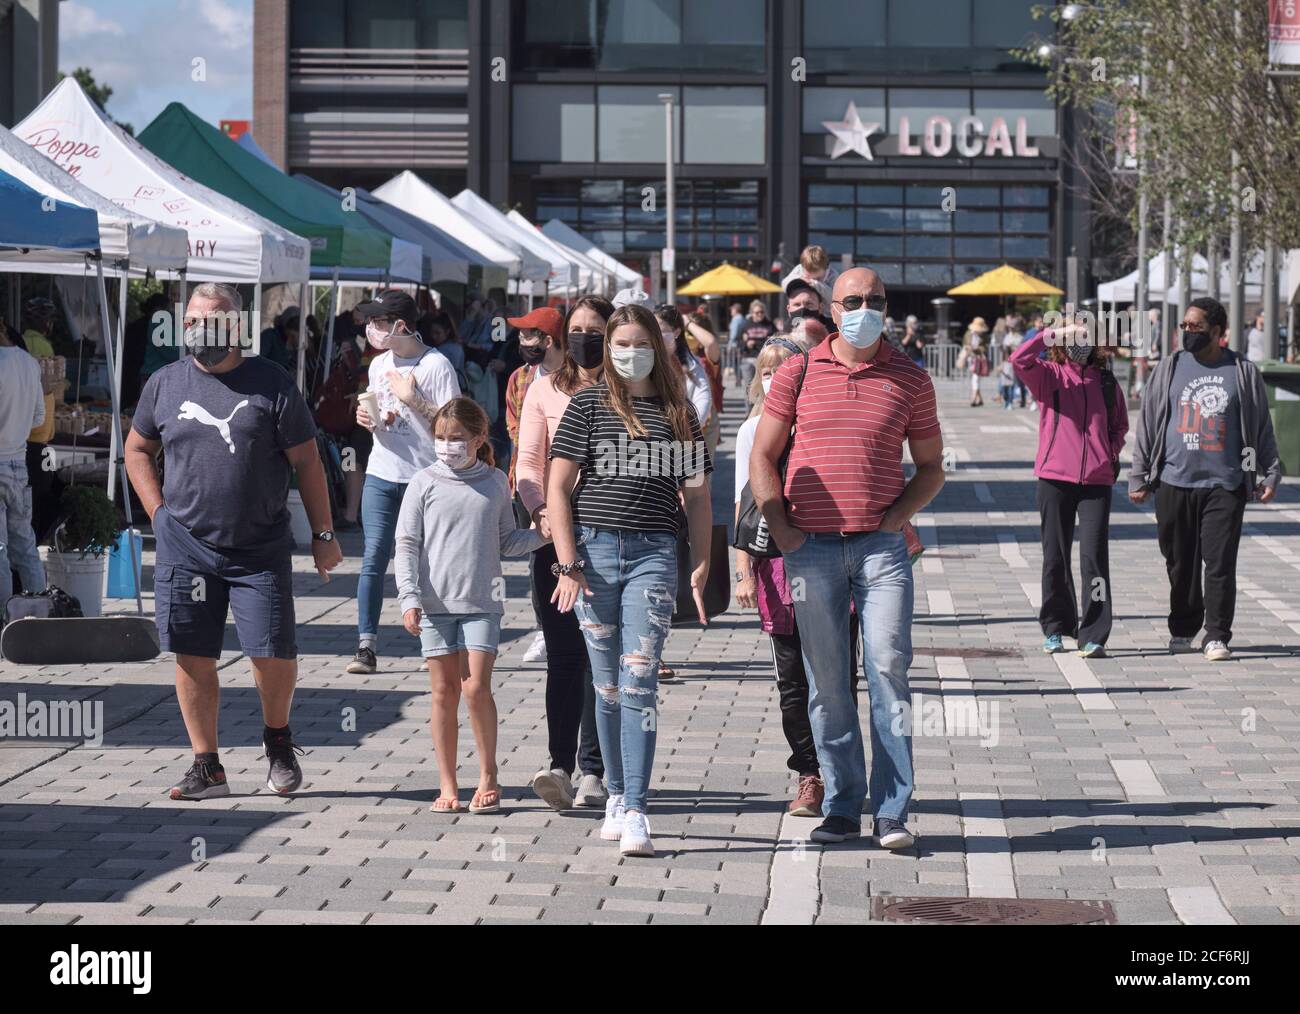 Lansdowne Farmers Market in Ottawa: People walking around area with majority wearing face masks keeping distance  buying produce Stock Photo